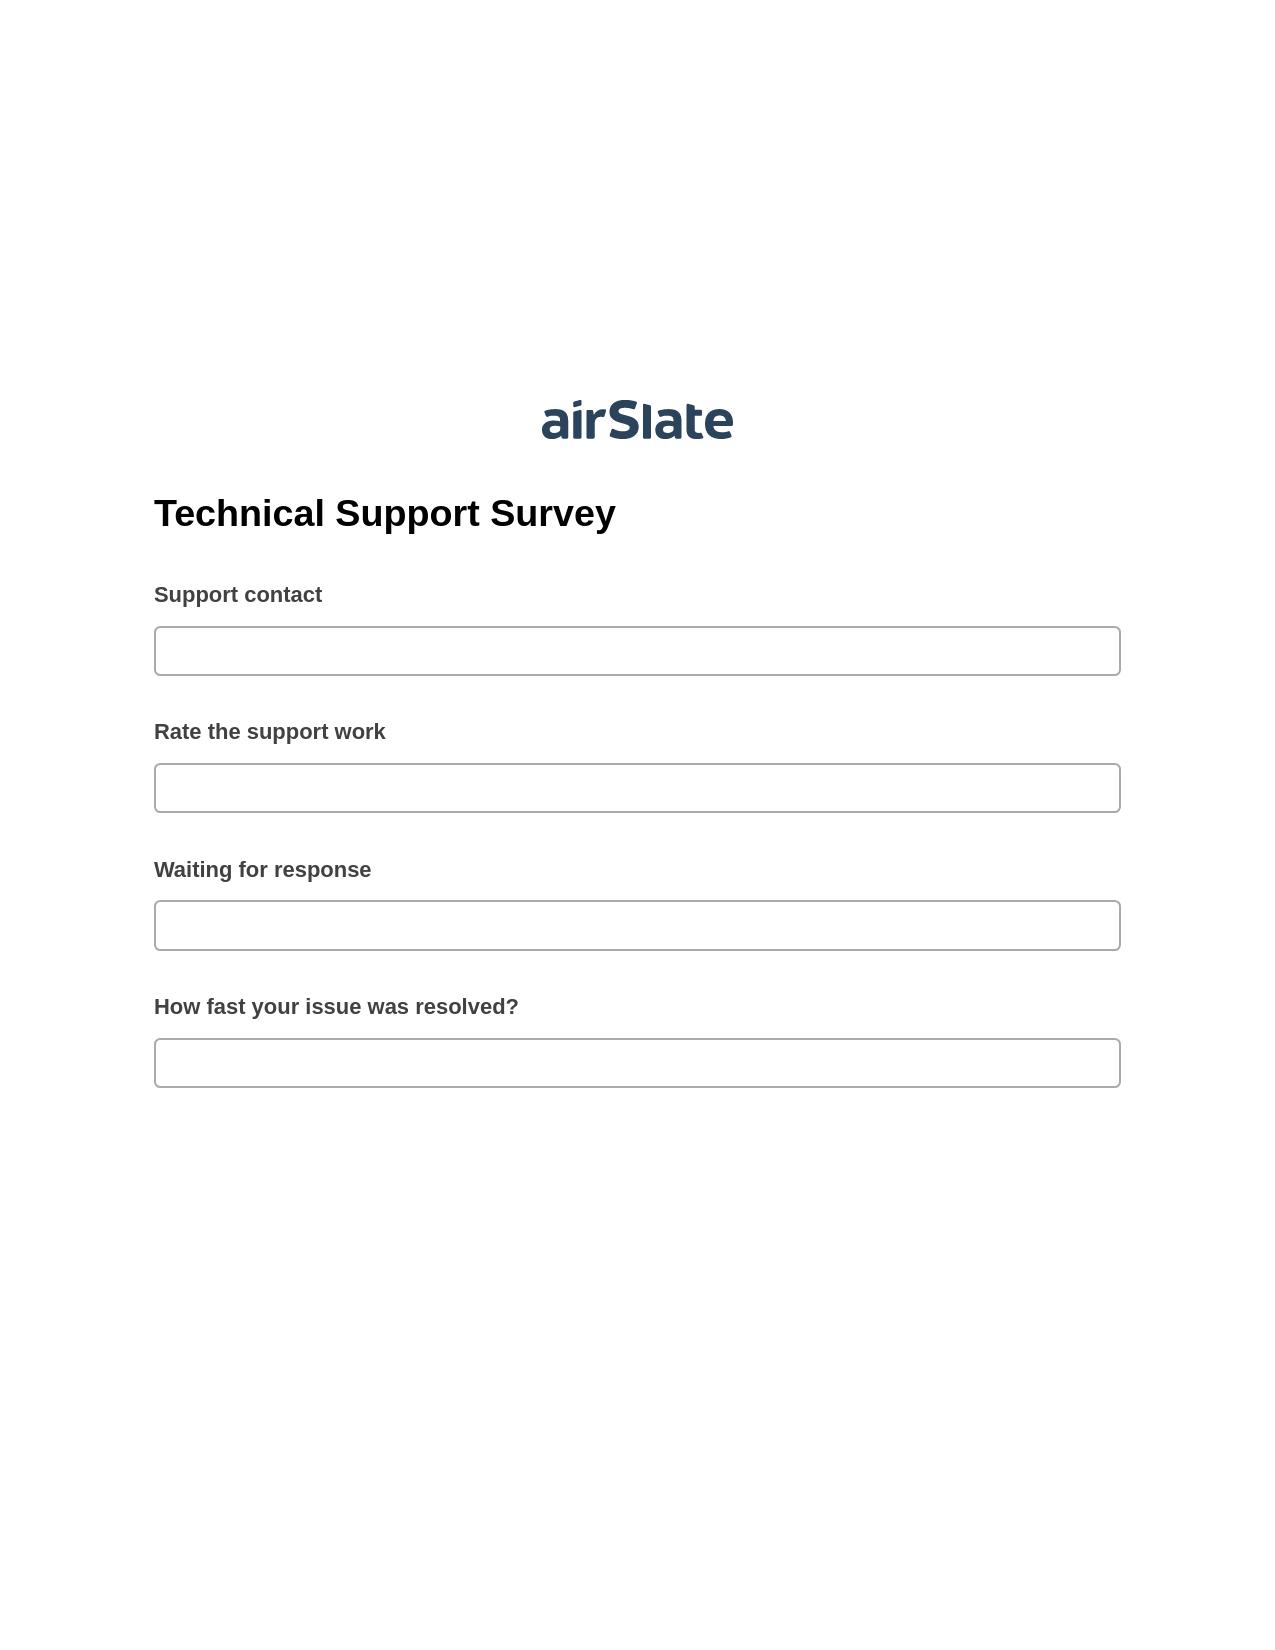 Technical Support Survey Pre-fill Dropdowns from Google Sheet Bot, Update NetSuite Record Bot, Export to Google Sheet Bot